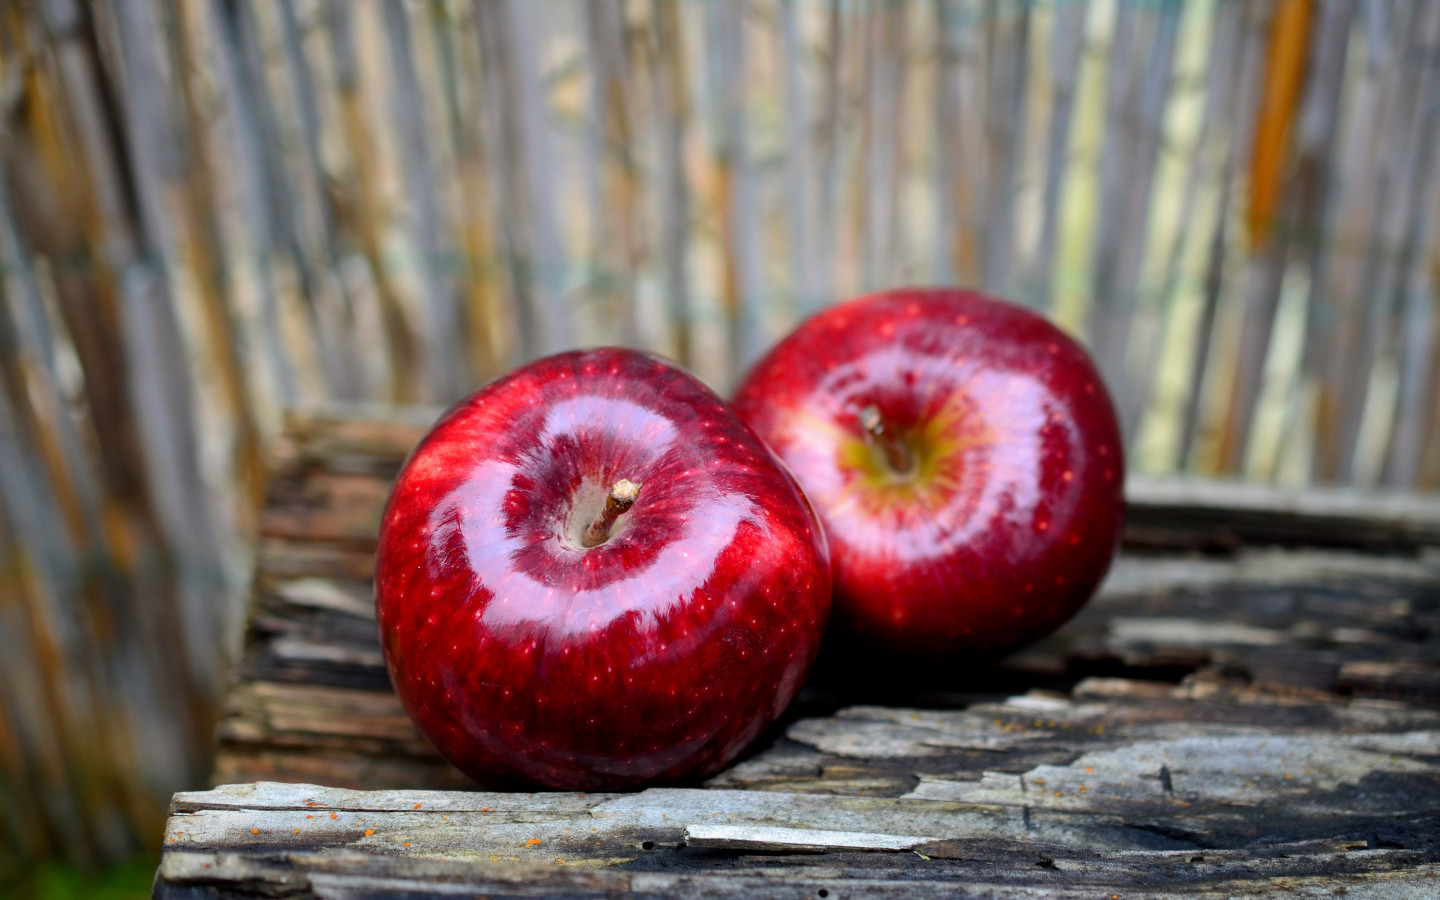 Delicious red apples wallpaper 1440x900